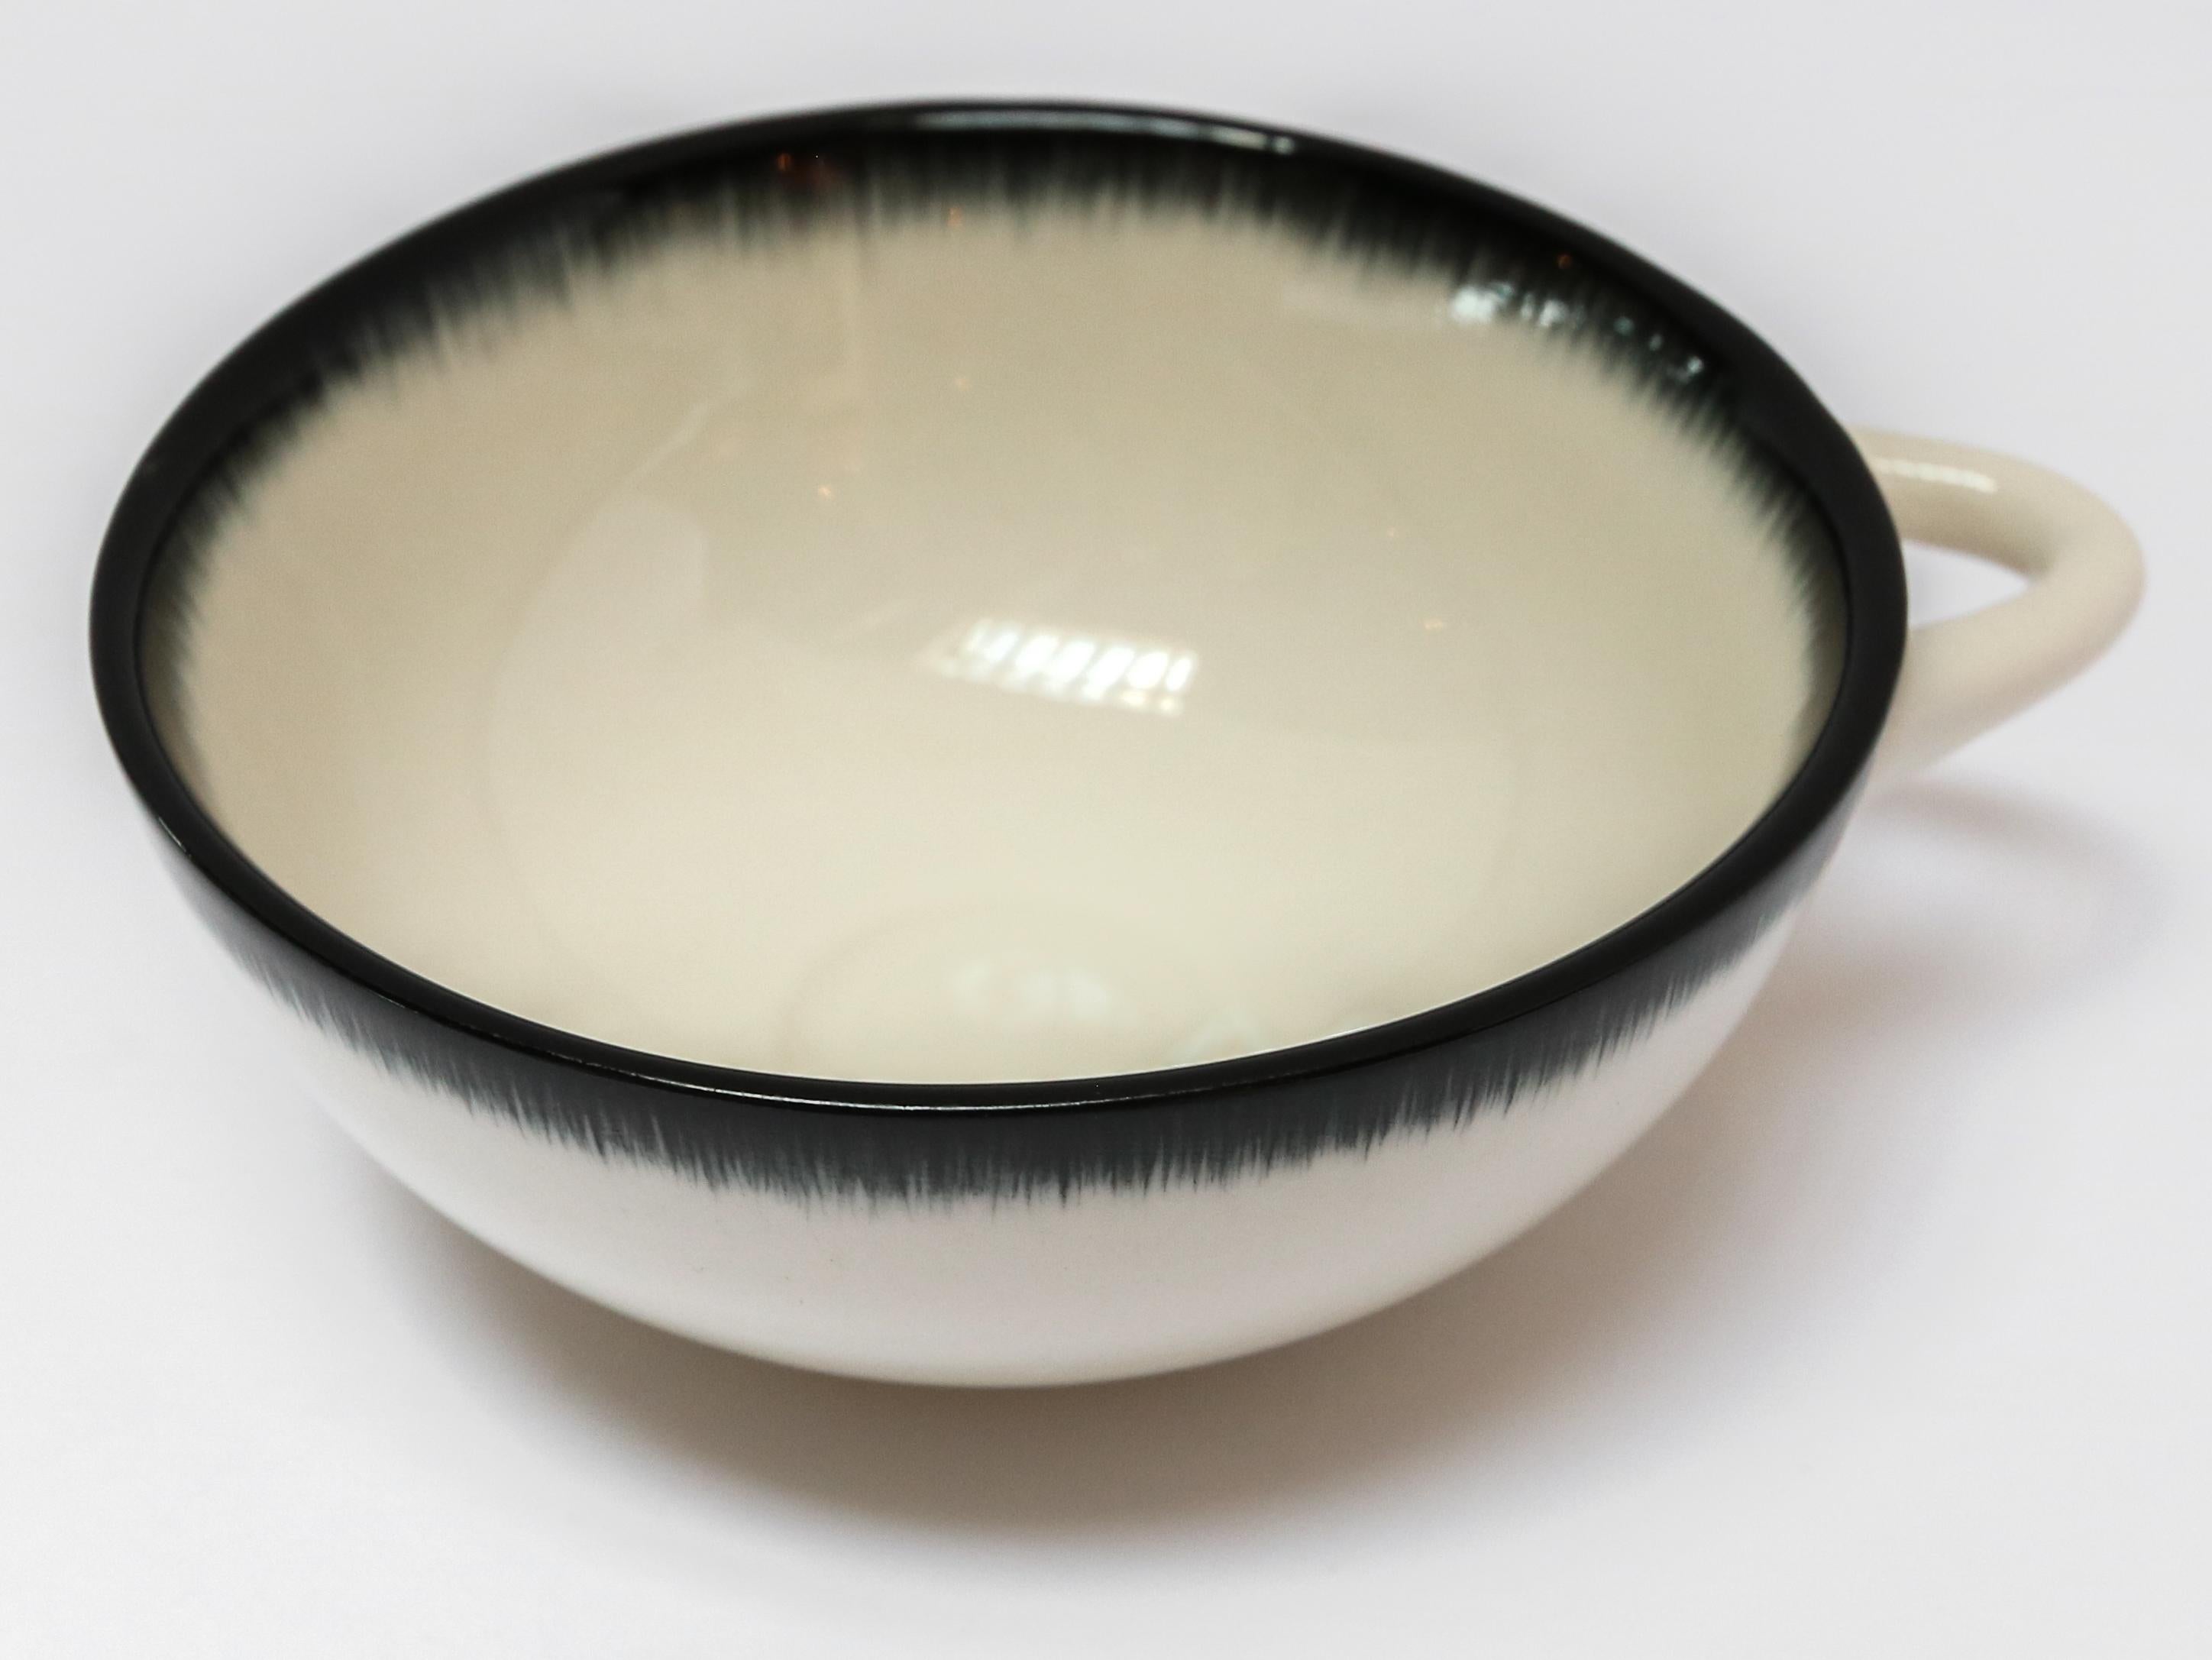 Ann Demeulemeester for Serax Dé espresso cup in off white / black rim. Hand painted with a starburst pattern. 7.8 cm diameter x 3.2 cm high. Must be purchased in quantities of two.